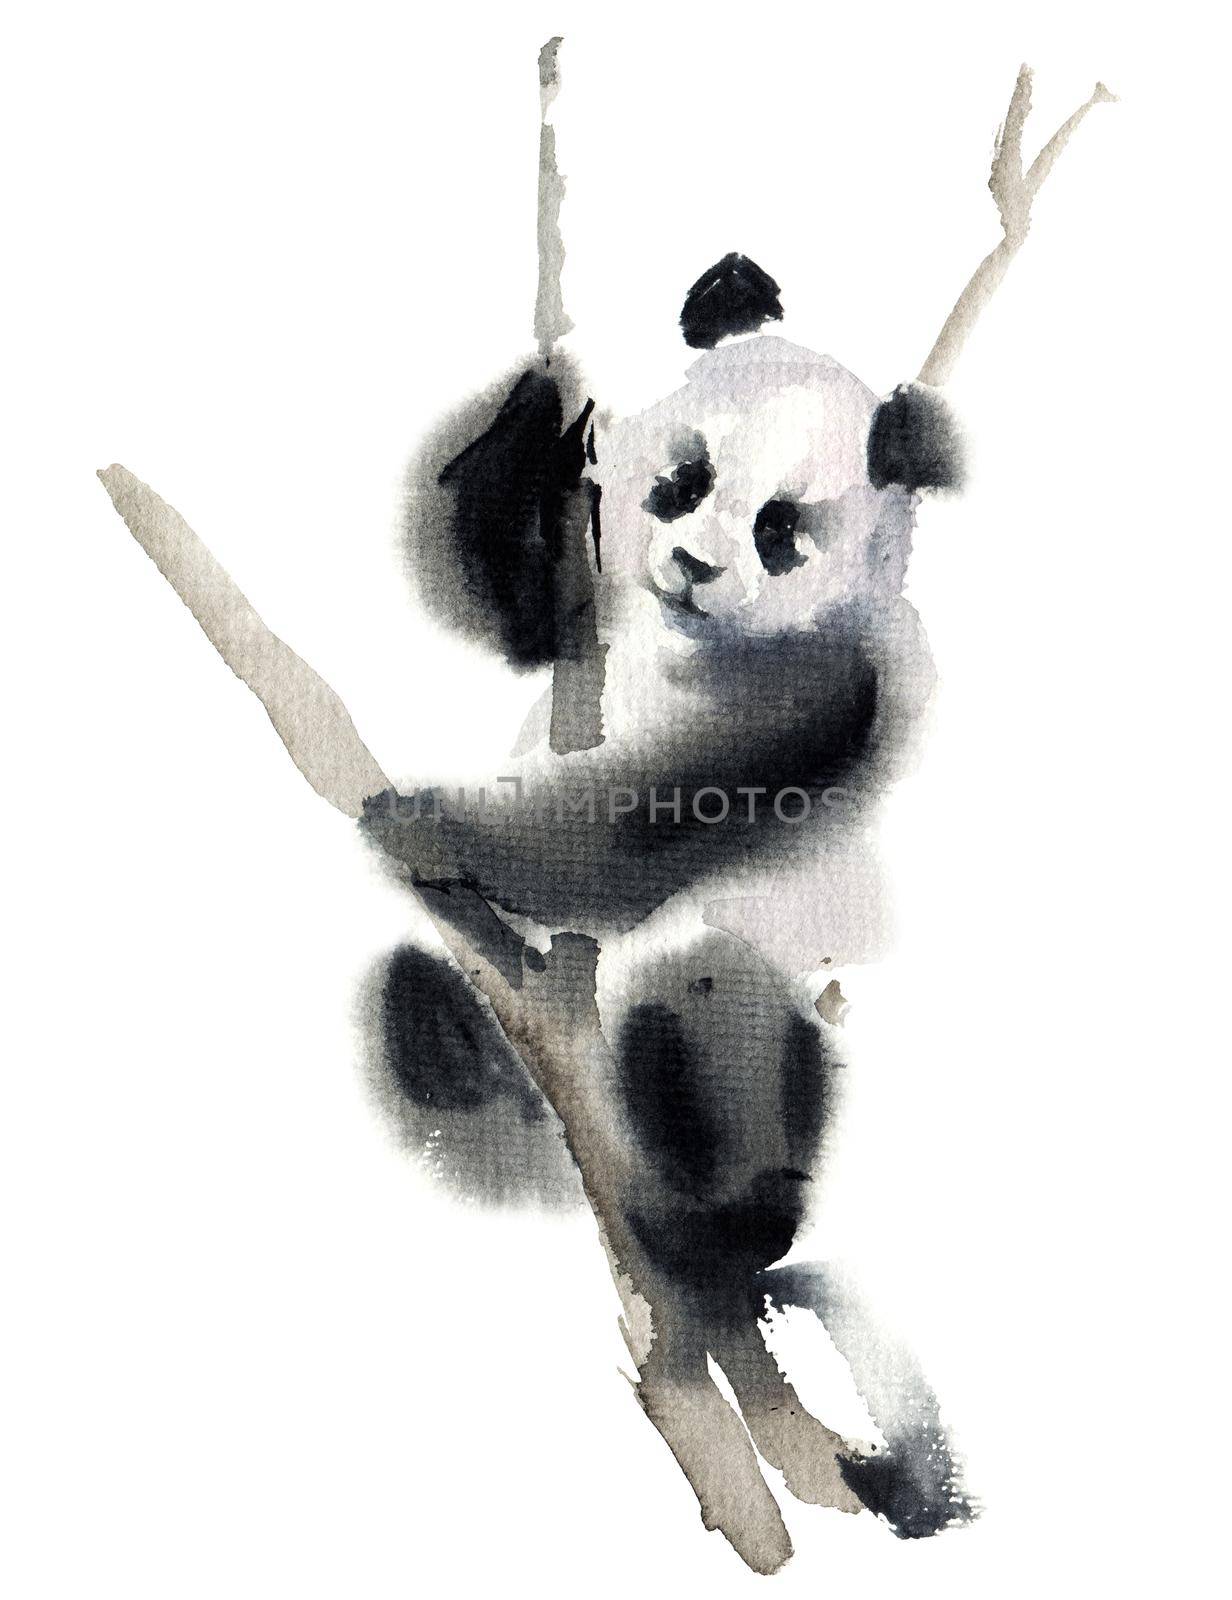 Watercolor and ink illustration of panda bear on the tree. Oriental traditional painting by ink and watercolor in sumi-e style.